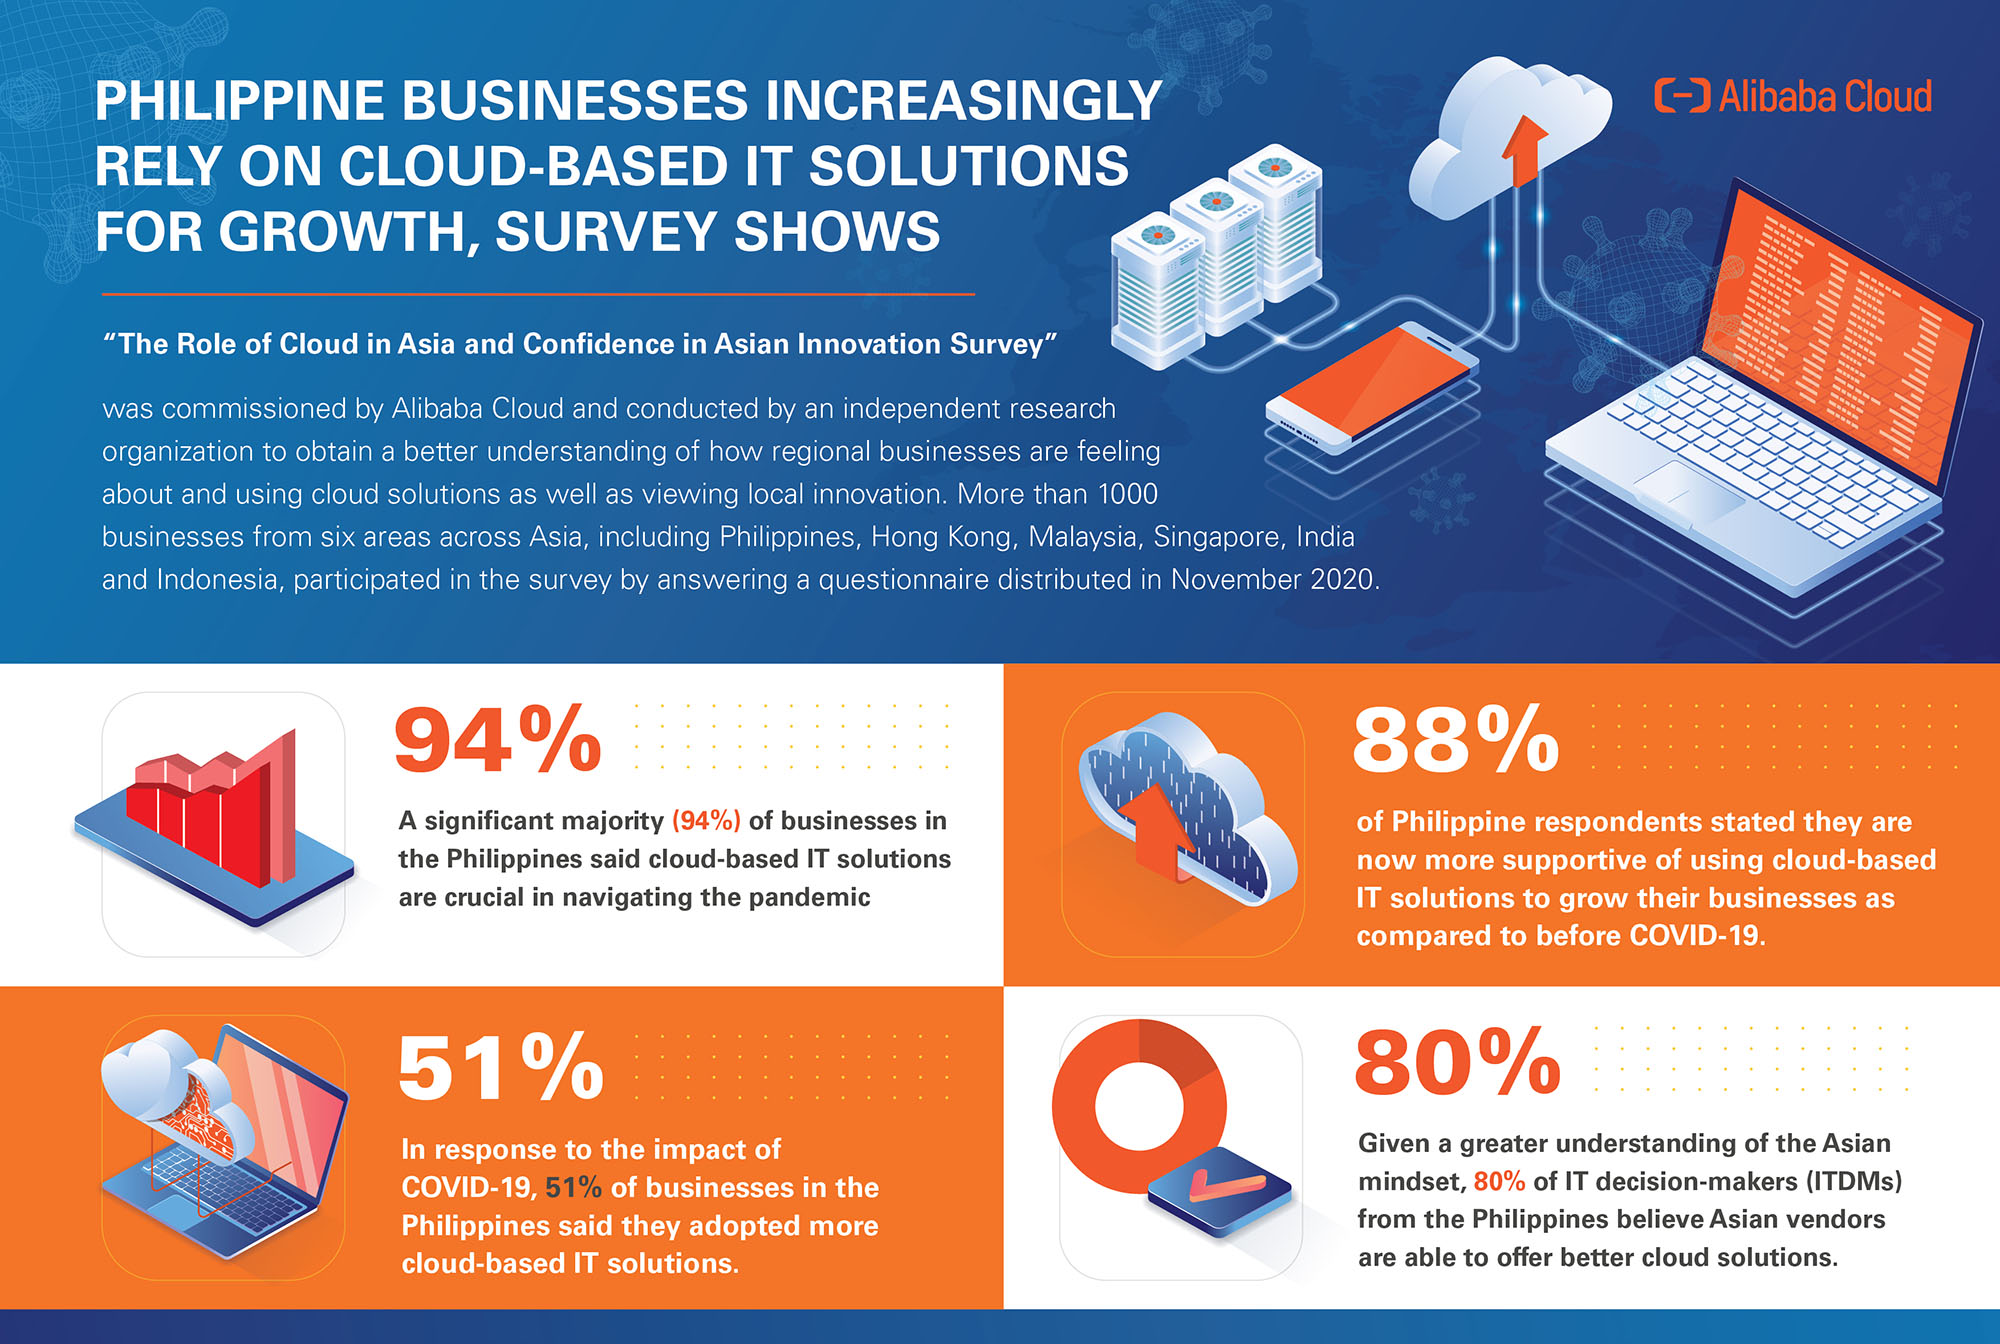 Philippine businesses increasingly rely on cloud-based IT solutions for growth, survey shows